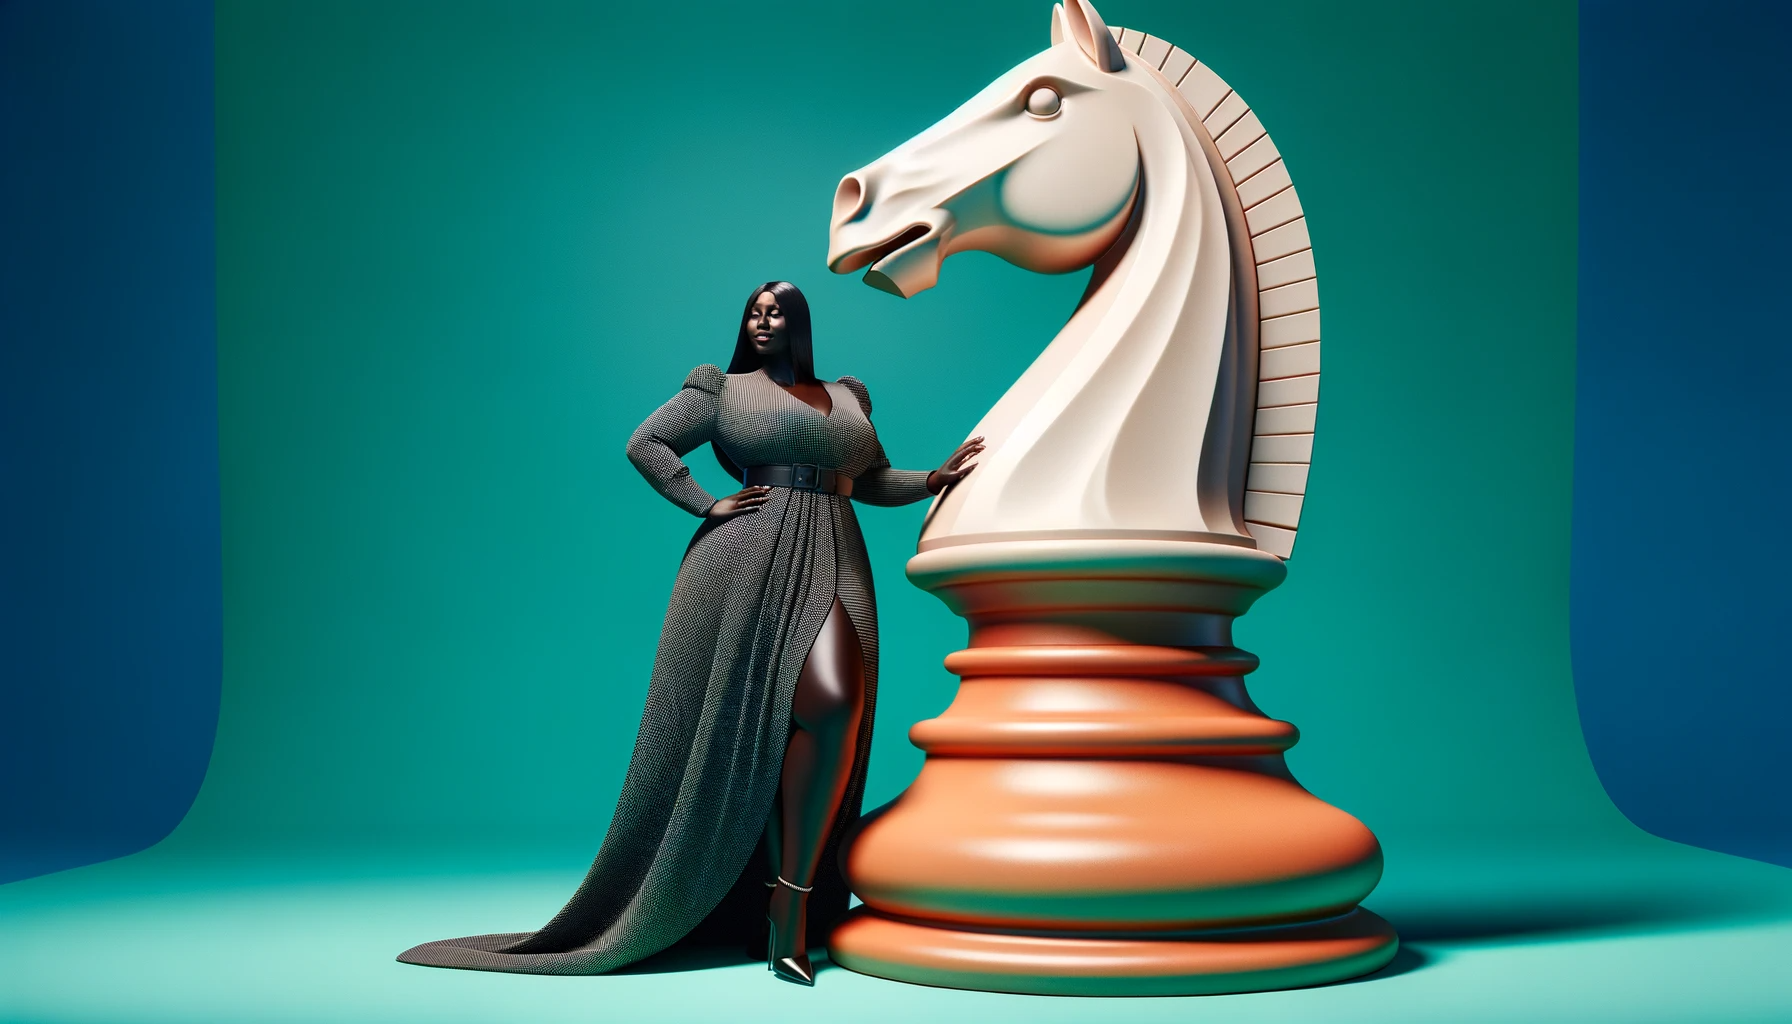 A Black woman standing next to a chess piece.